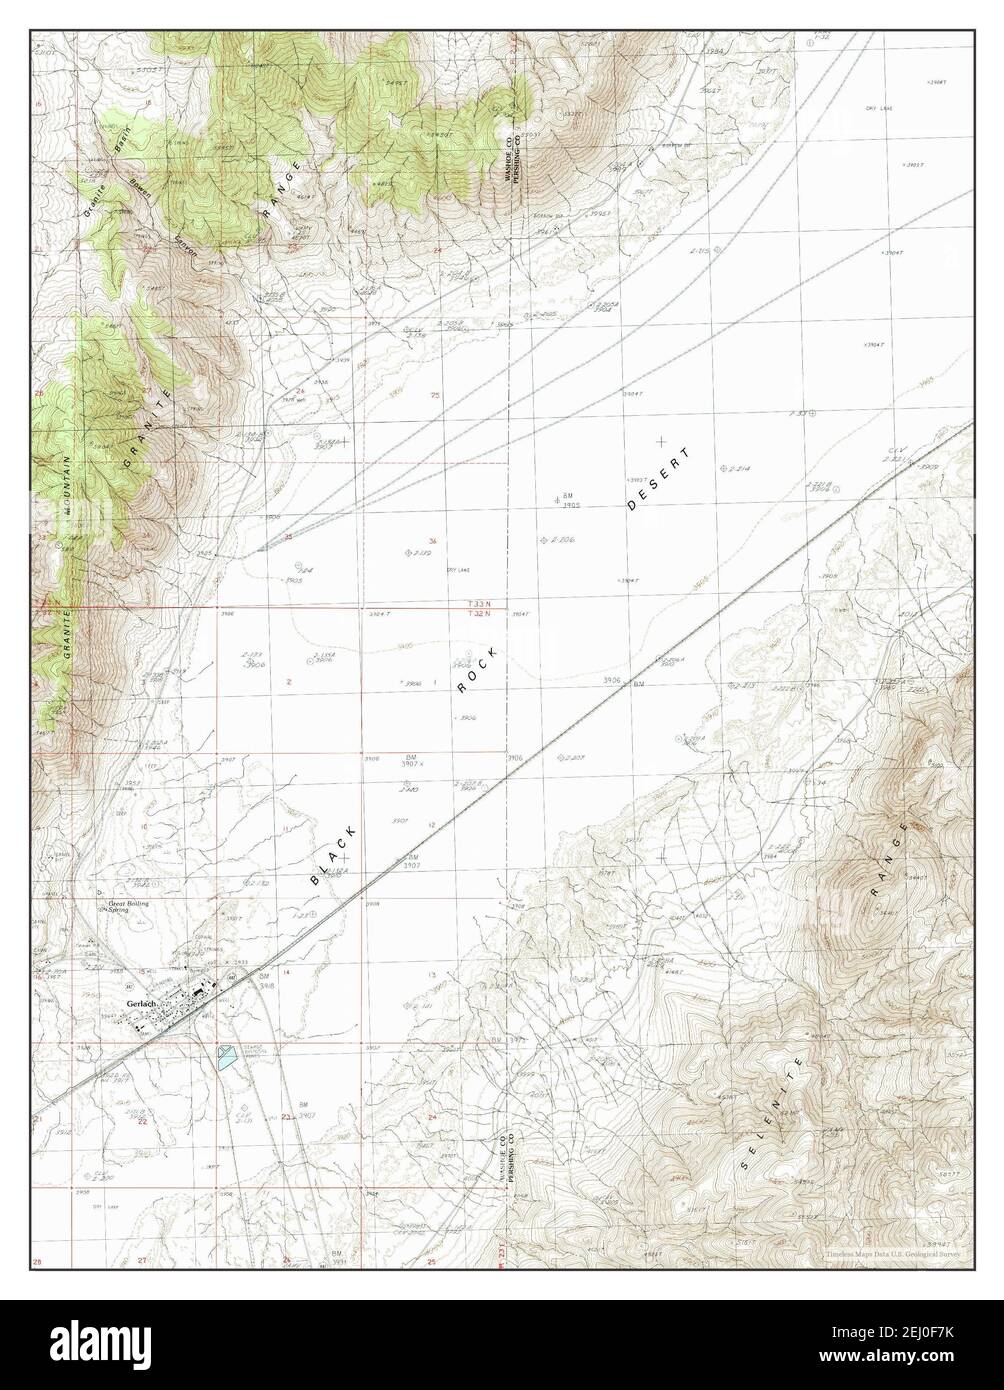 Gerlach, Nevada, map 1990, 1:24000, United States of America by Timeless Maps, data U.S. Geological Survey Stock Photo